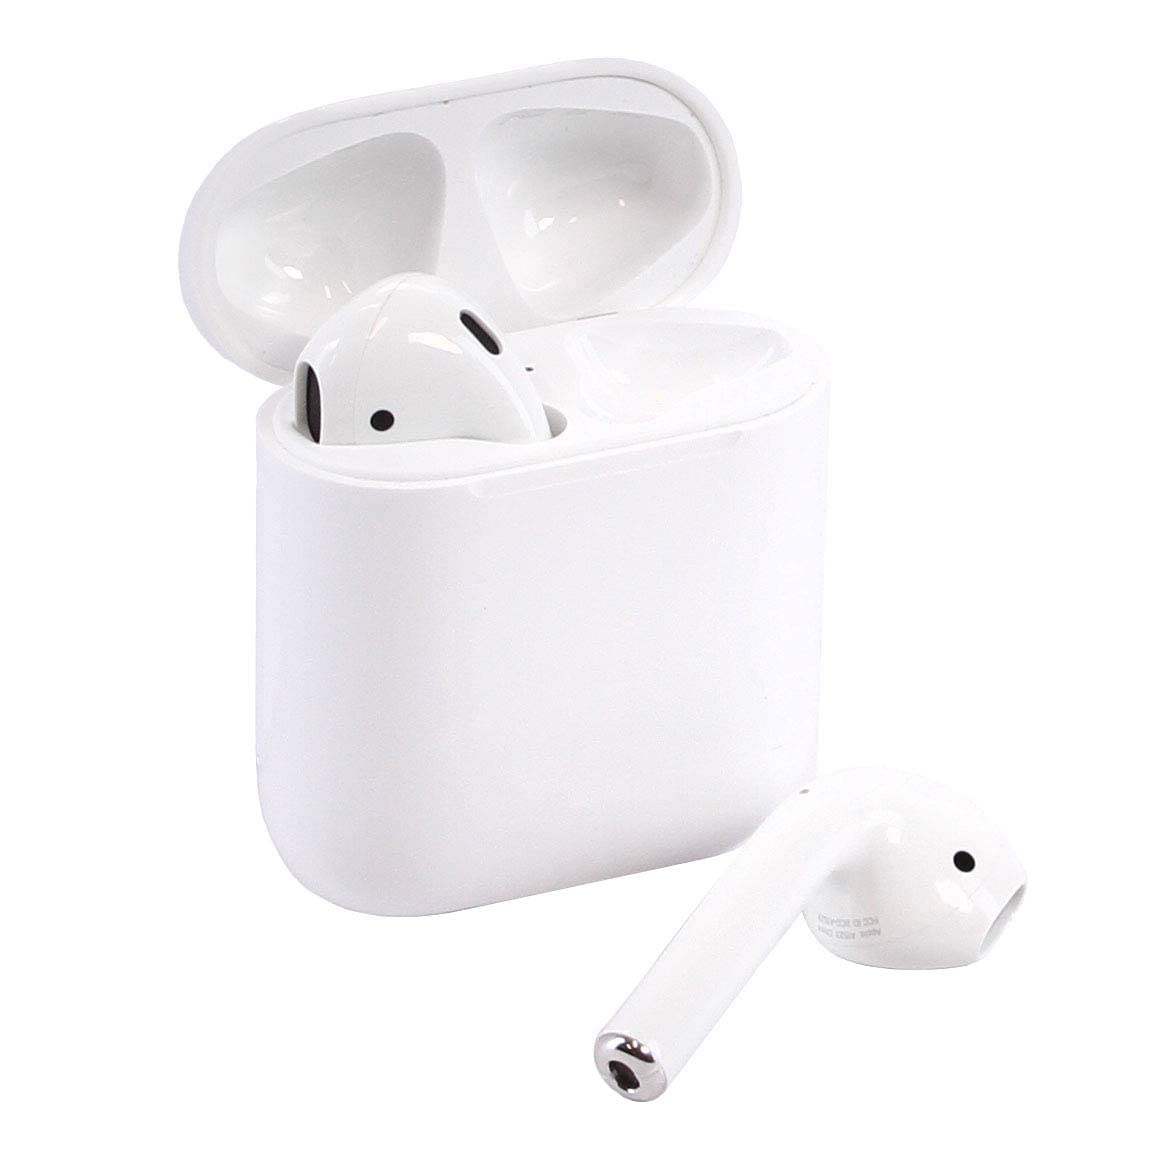 High Quality Earpods ( for android and Iphones) Wireless + Powerbank